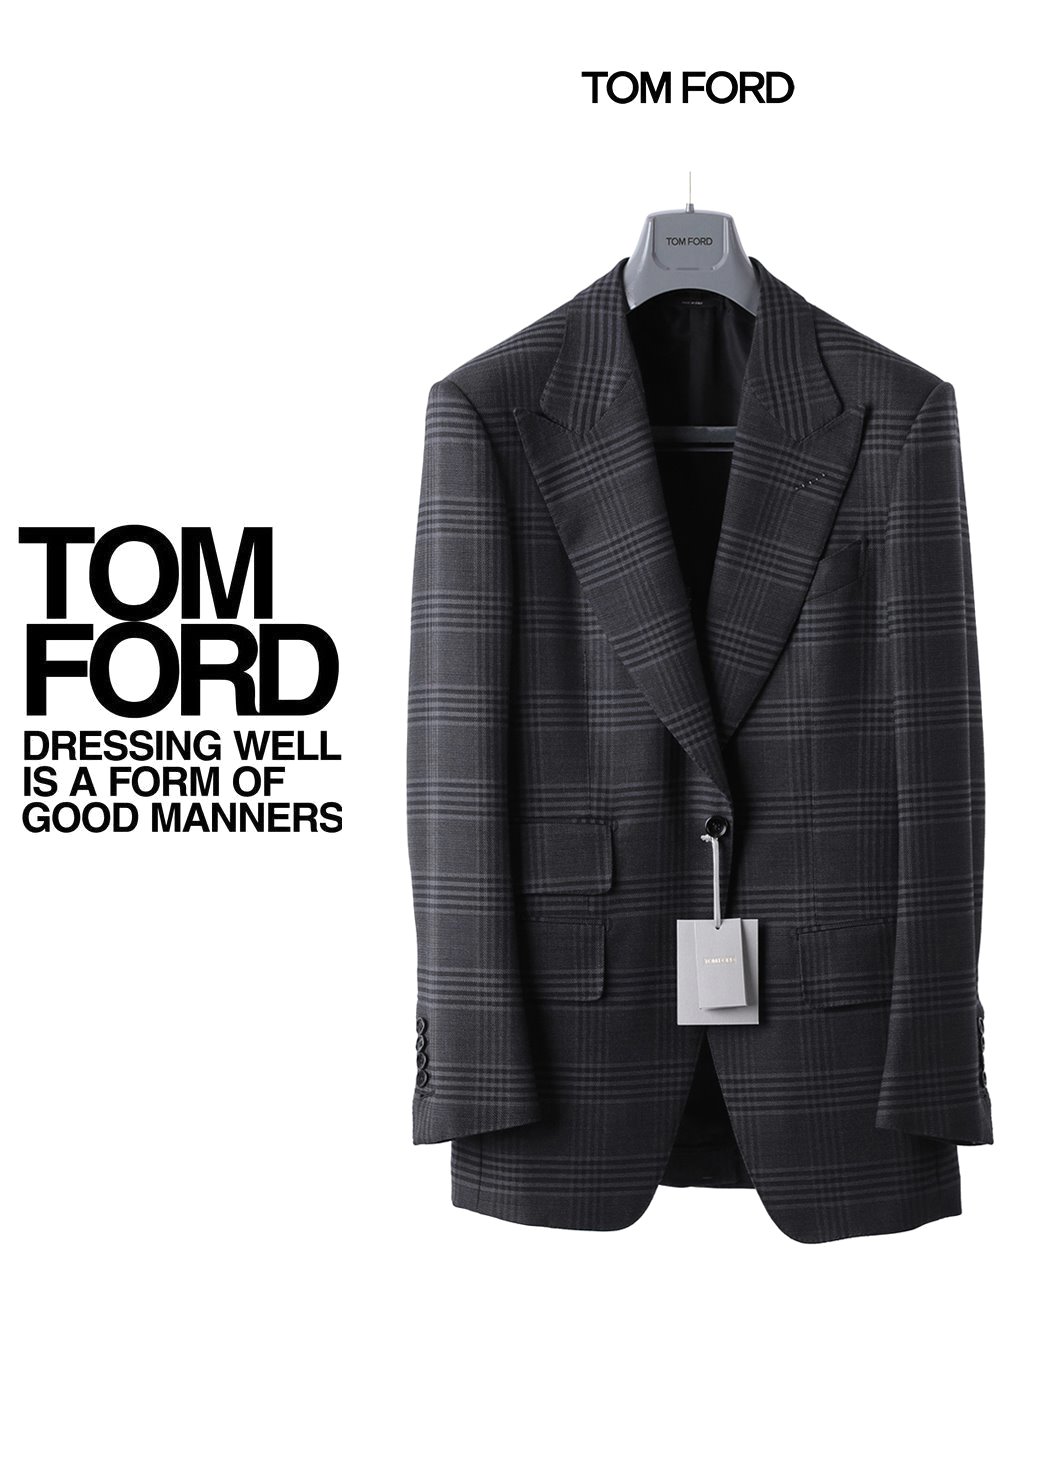 TOMFORD Atticus Charcoal Gingham Check Suit